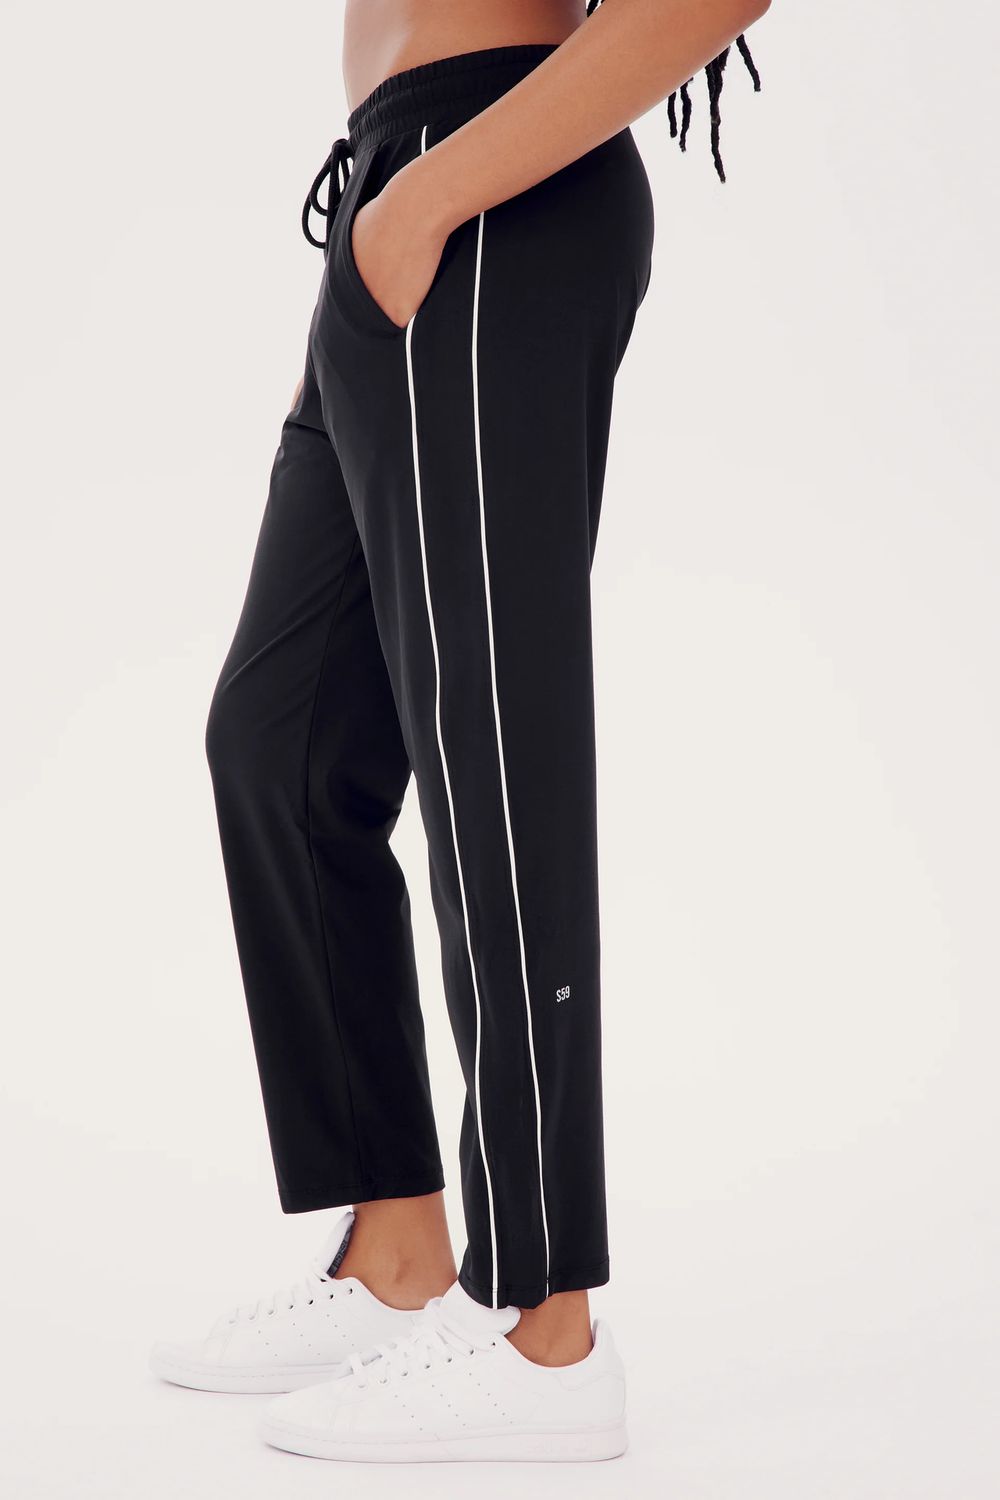 Splits59, Lucy Rigor Pant w/piping, size: xs, color: black